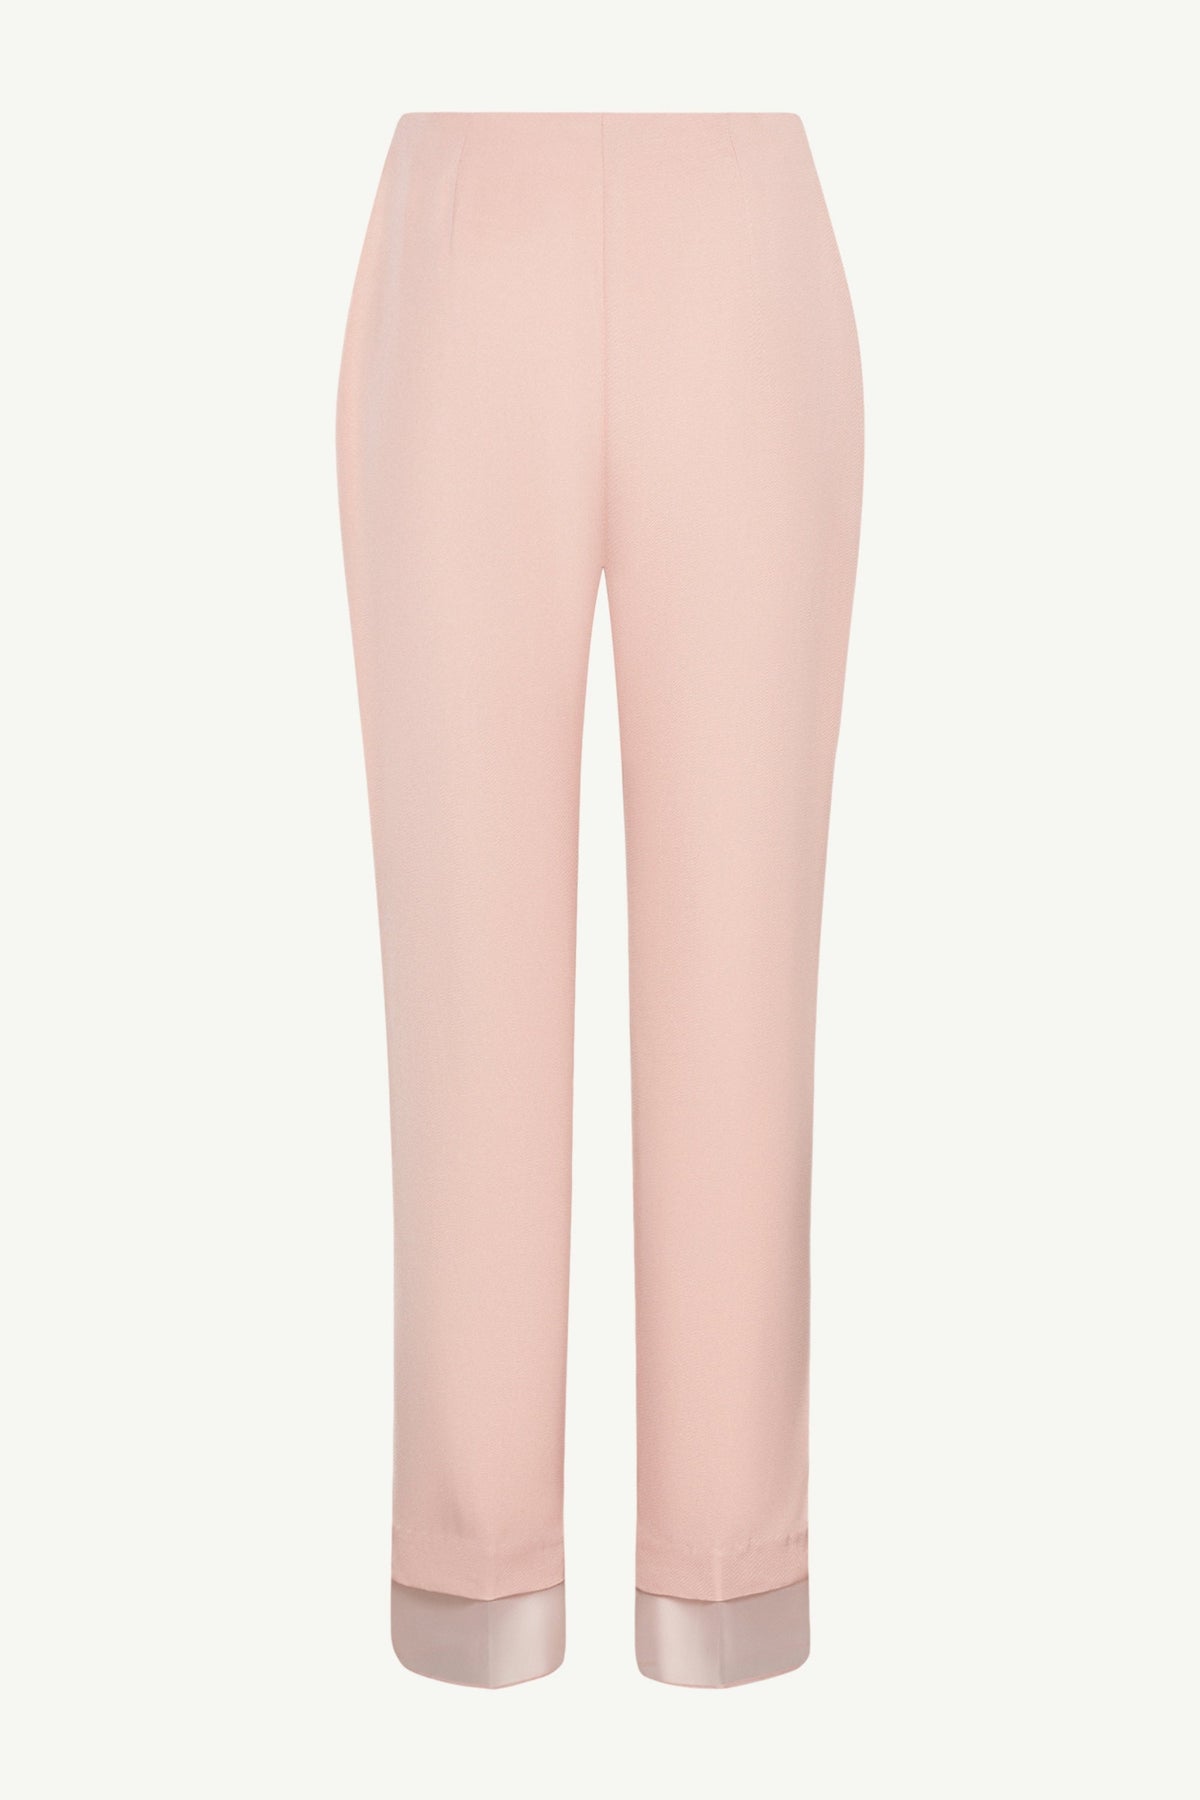 Rayan Organza Trim Trousers - Sepia Rose Clothing epschoolboard 